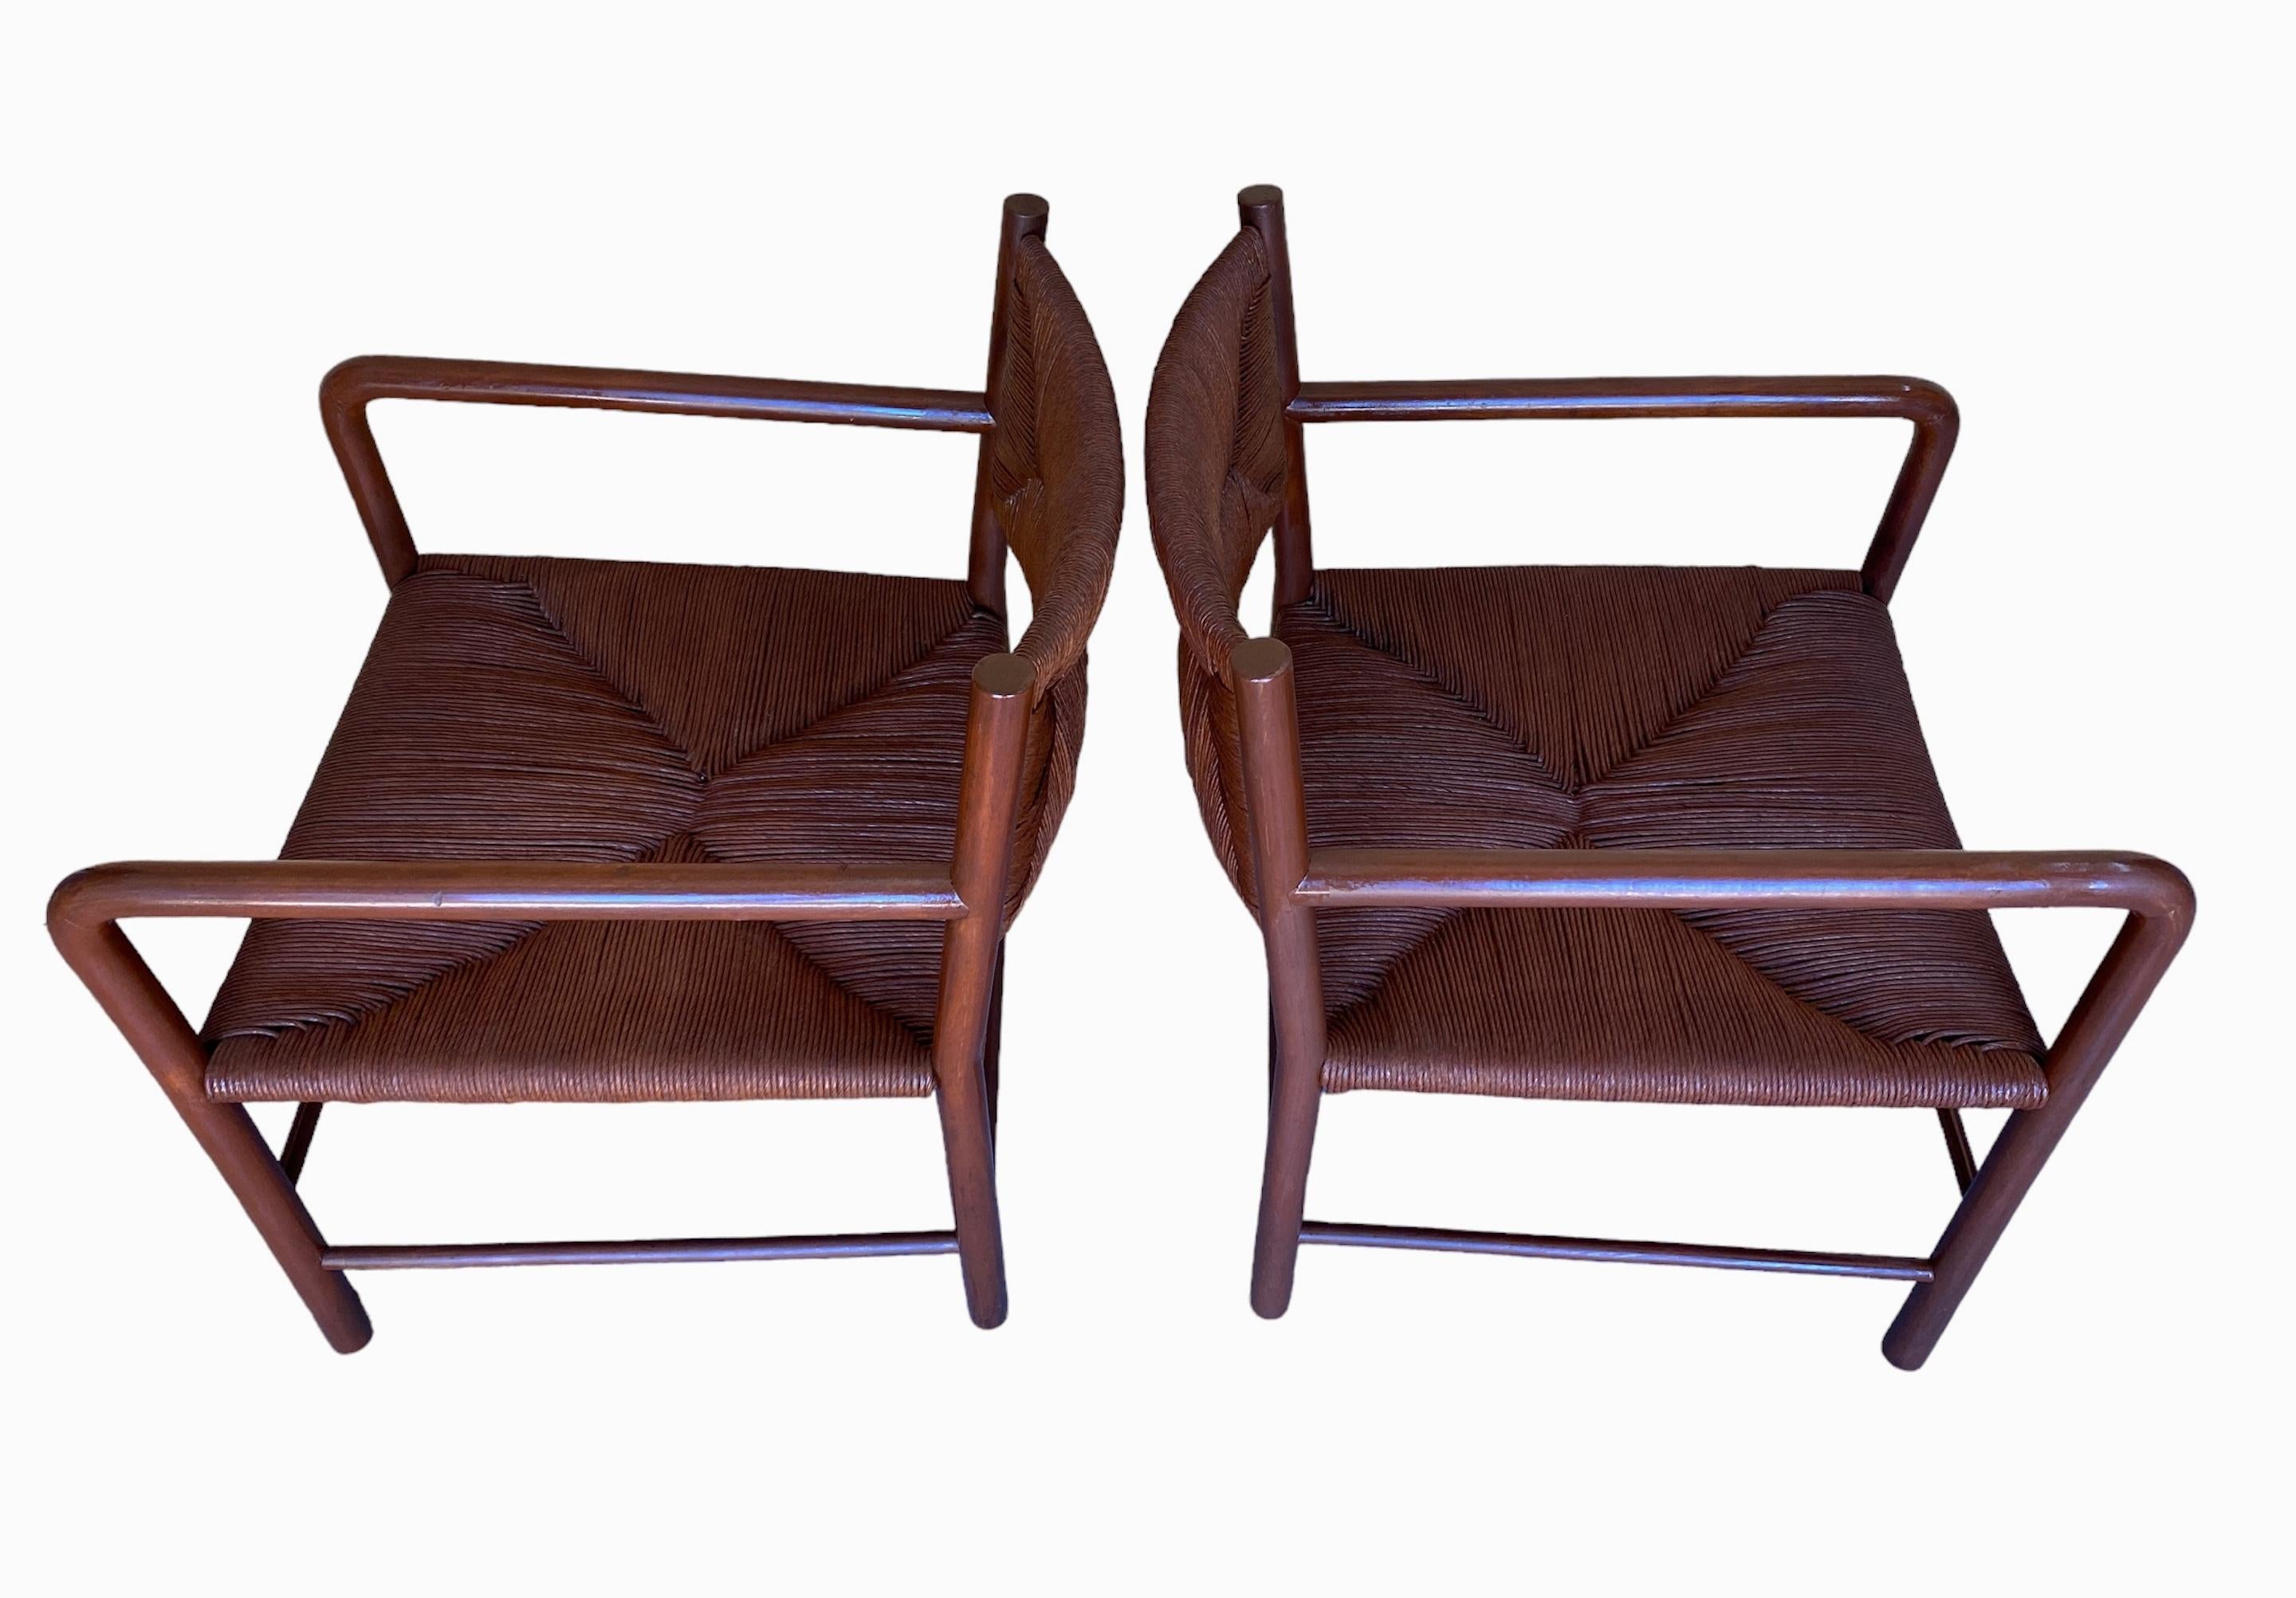 Pair of Emanuele Rambaldi Modernist Brown Lacquered Armchairs, Italy 1940s For Sale 5